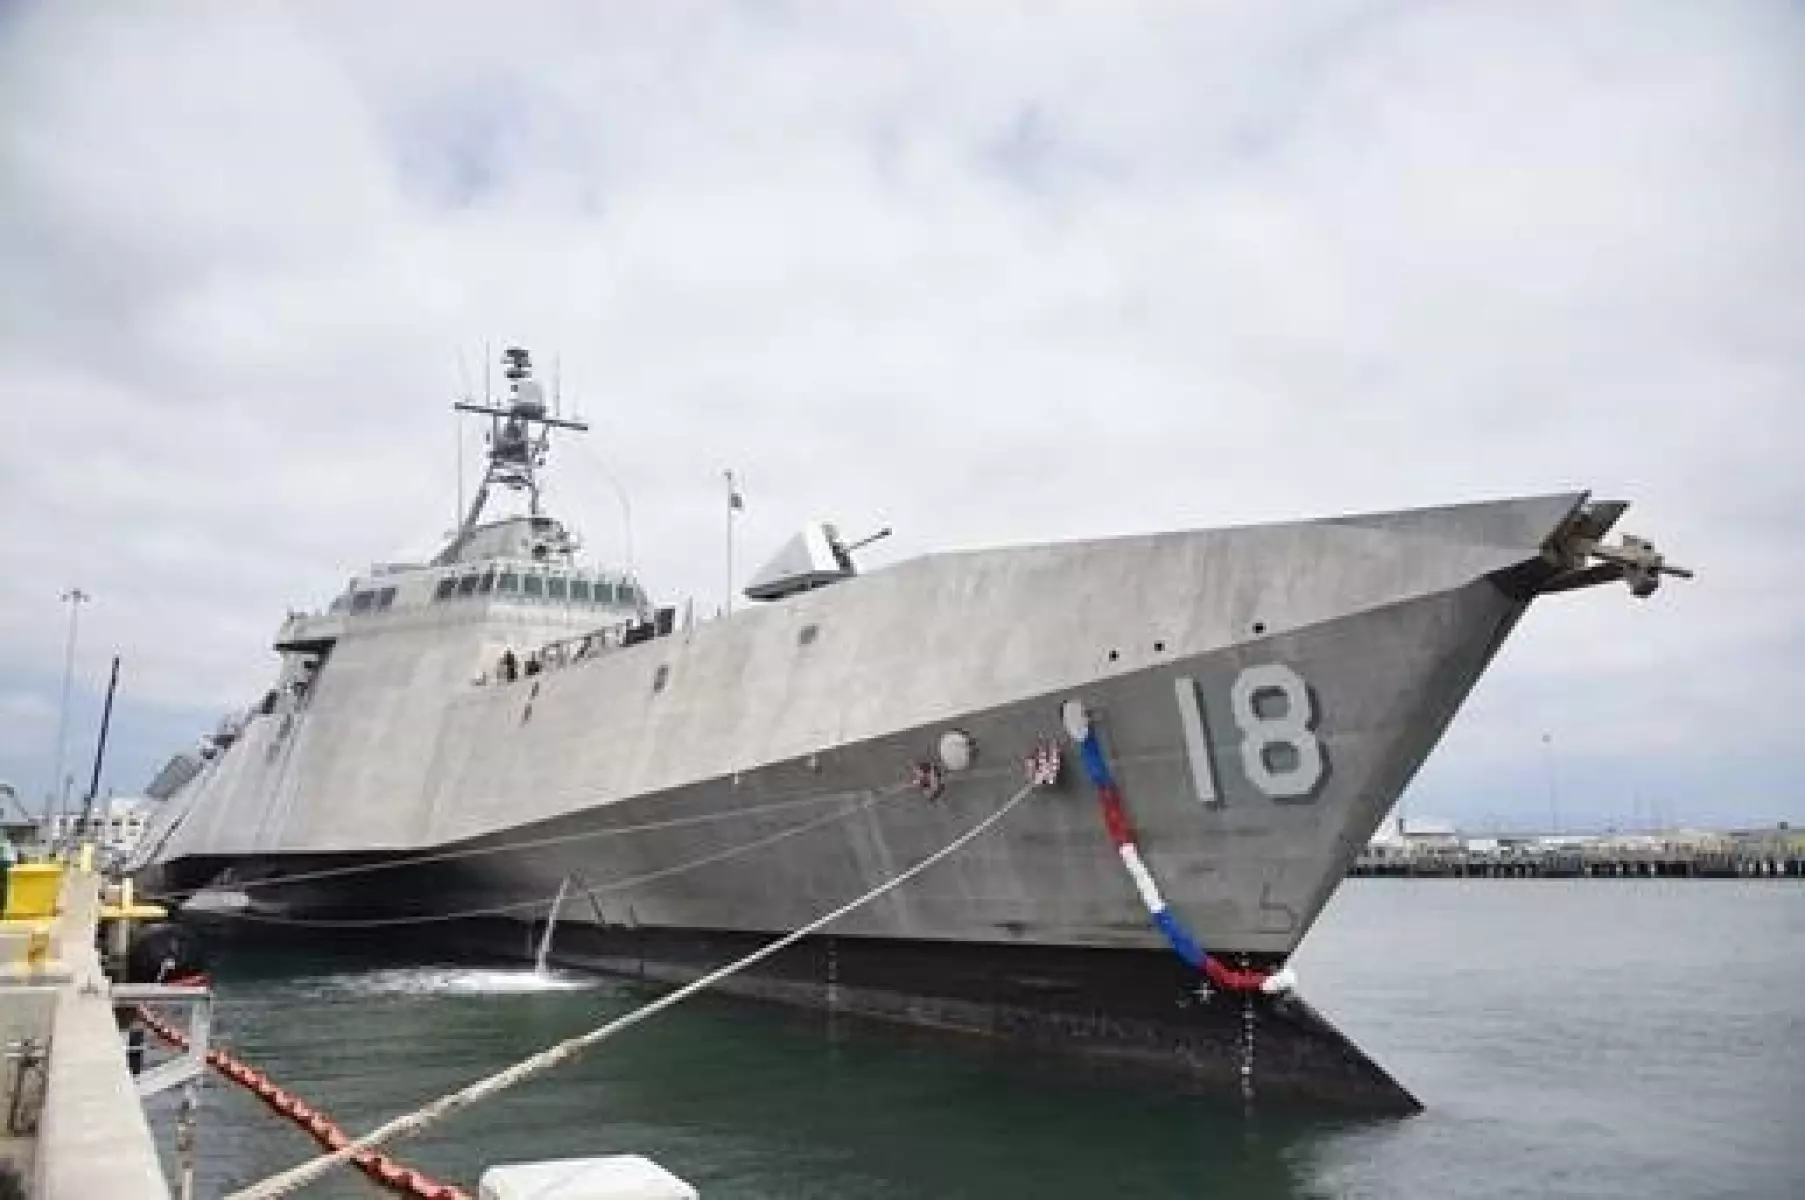 The littoral combat ship Charleston return to San Diego Bay on June 14 after a long deployment.